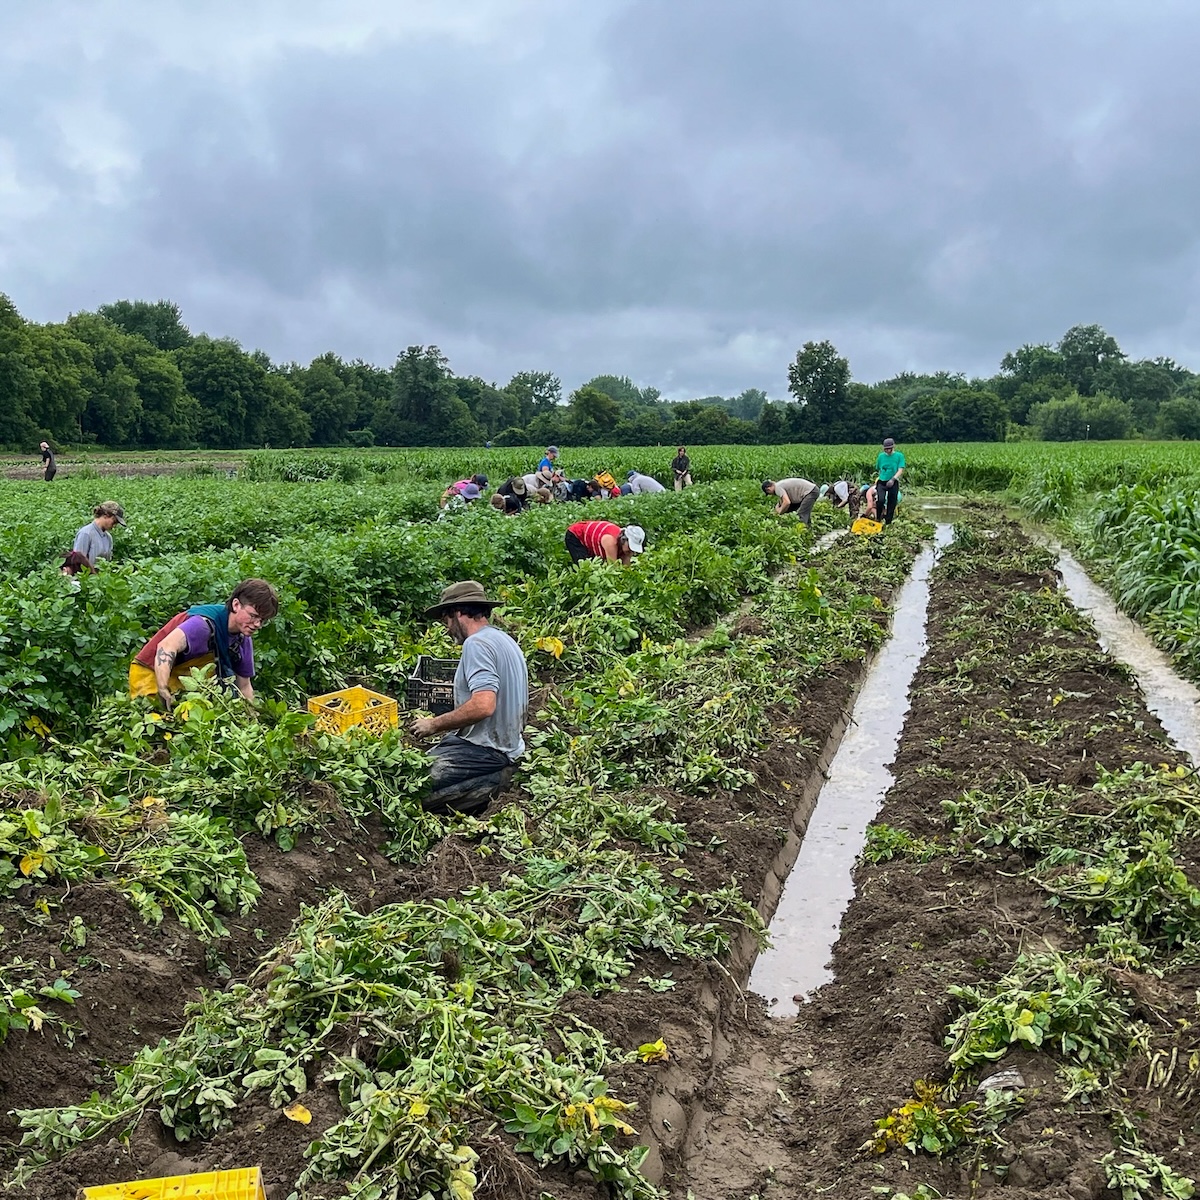 People harvest vegetables in a flooding field